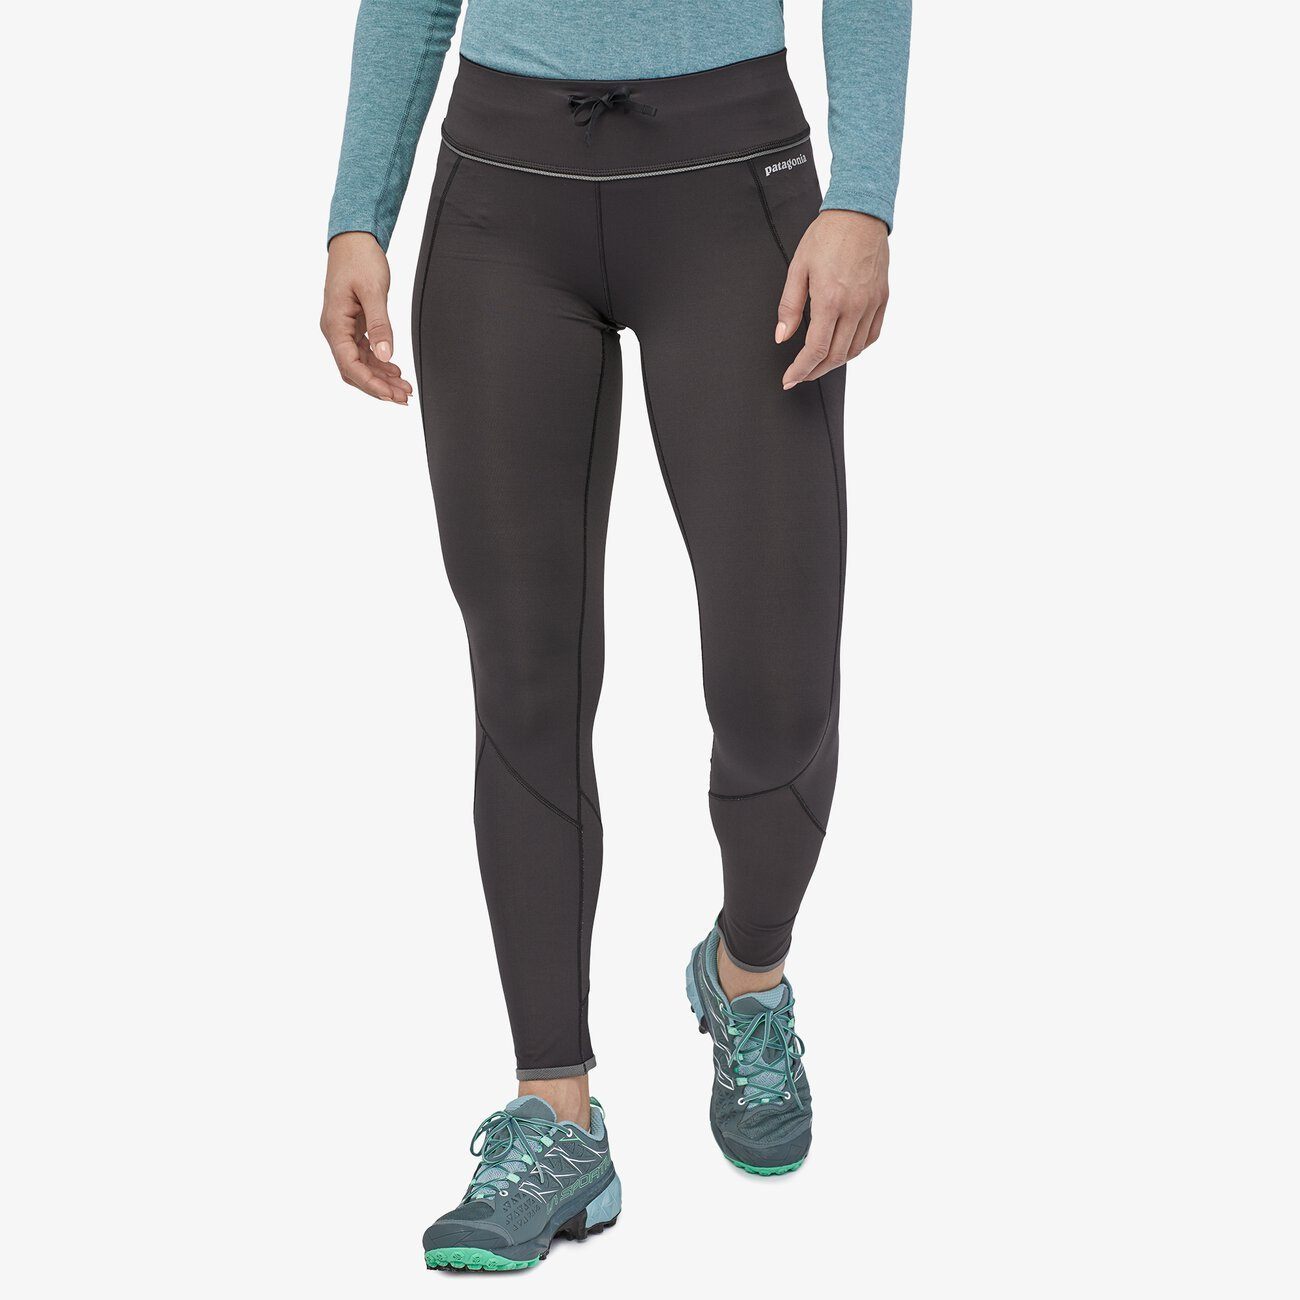 Patagonia Women's Peak Mission Running Tights - Recycled Polyester, Black / S